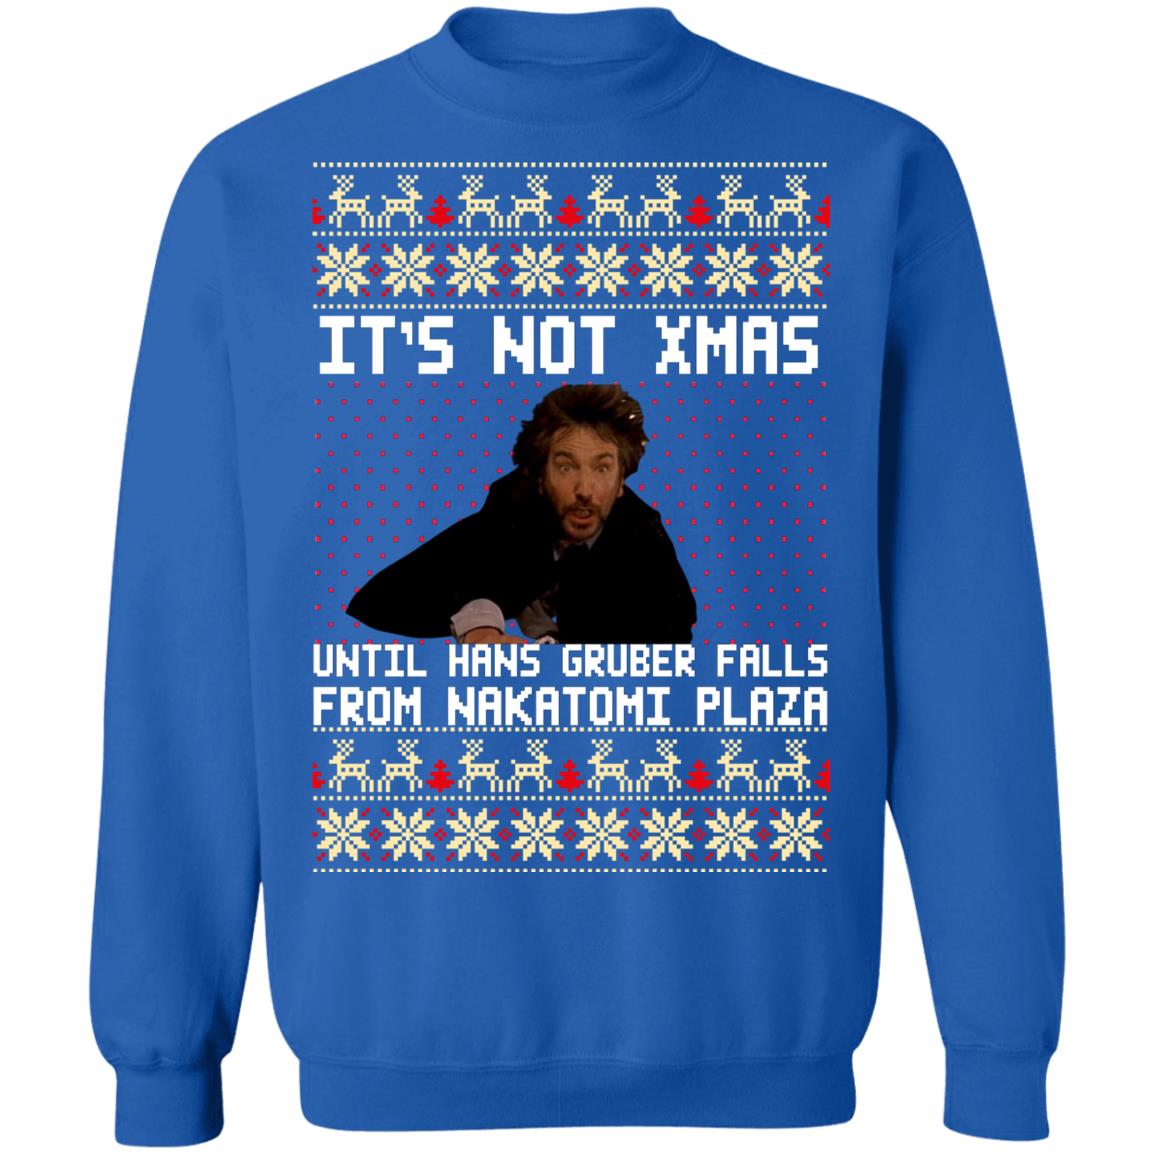 Henfald Dyrke motion Lydighed Die hard It's not Christmas until you see Hans Gruber Christmas sweater